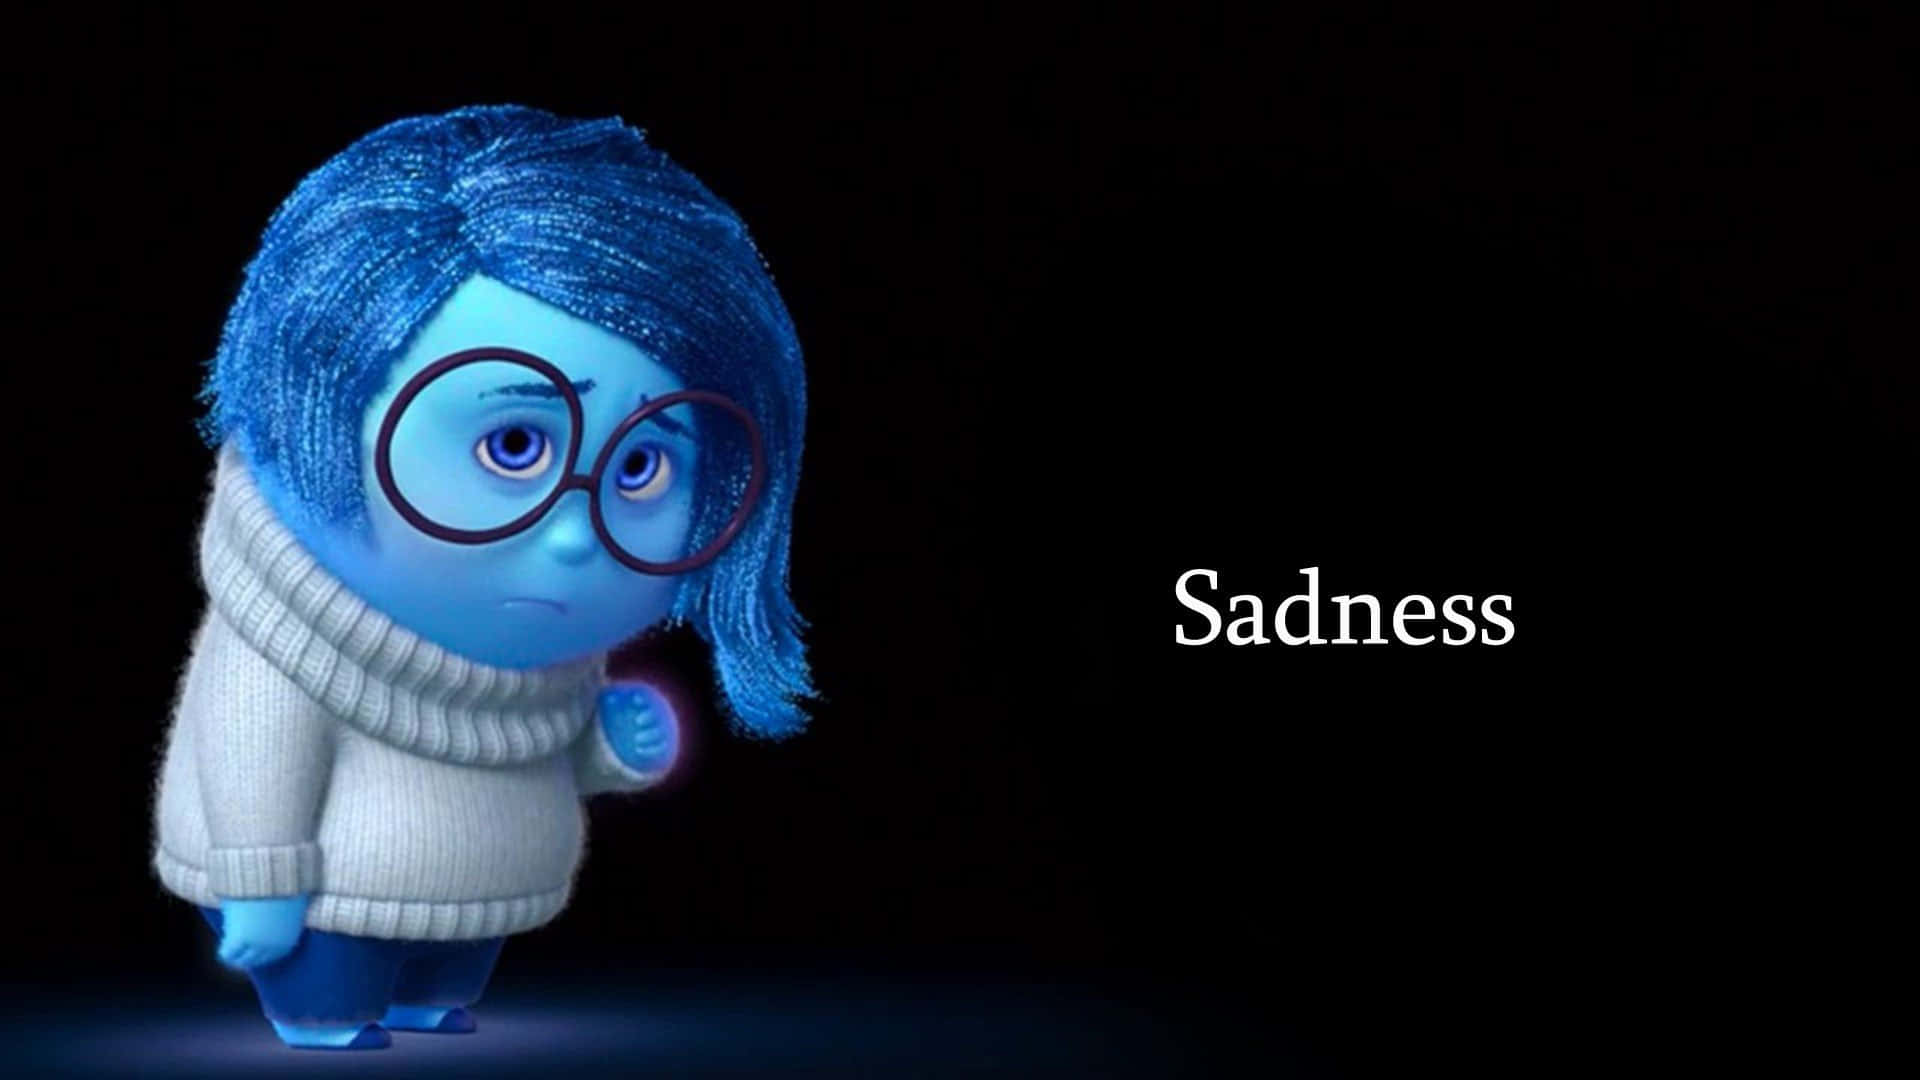 Joy and sadness come together to form a complete emotional landscape